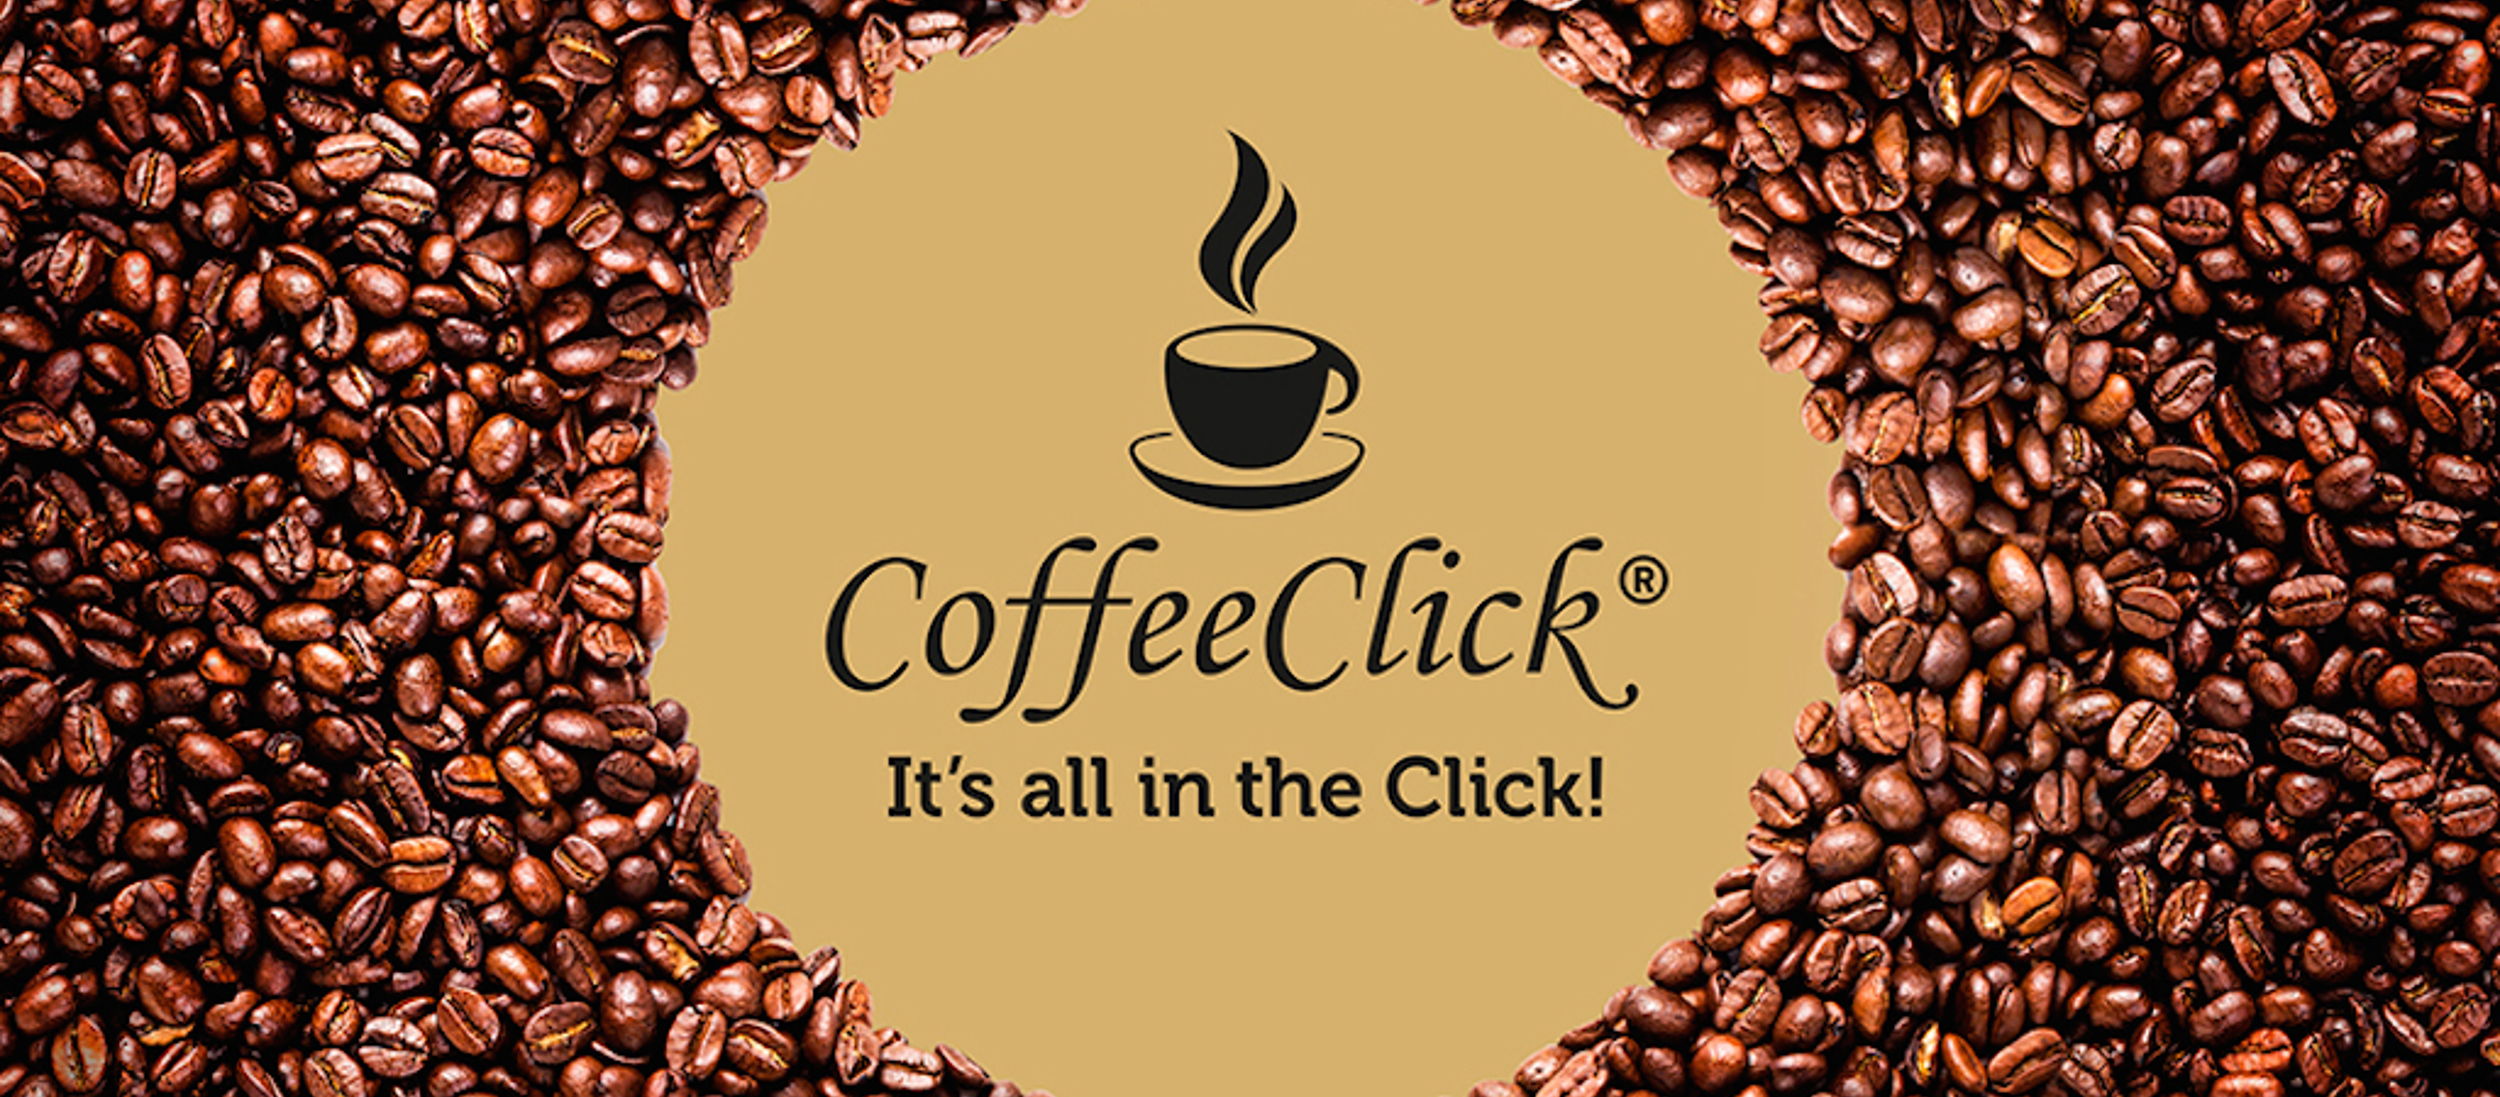 Coffeeclick its all in the click